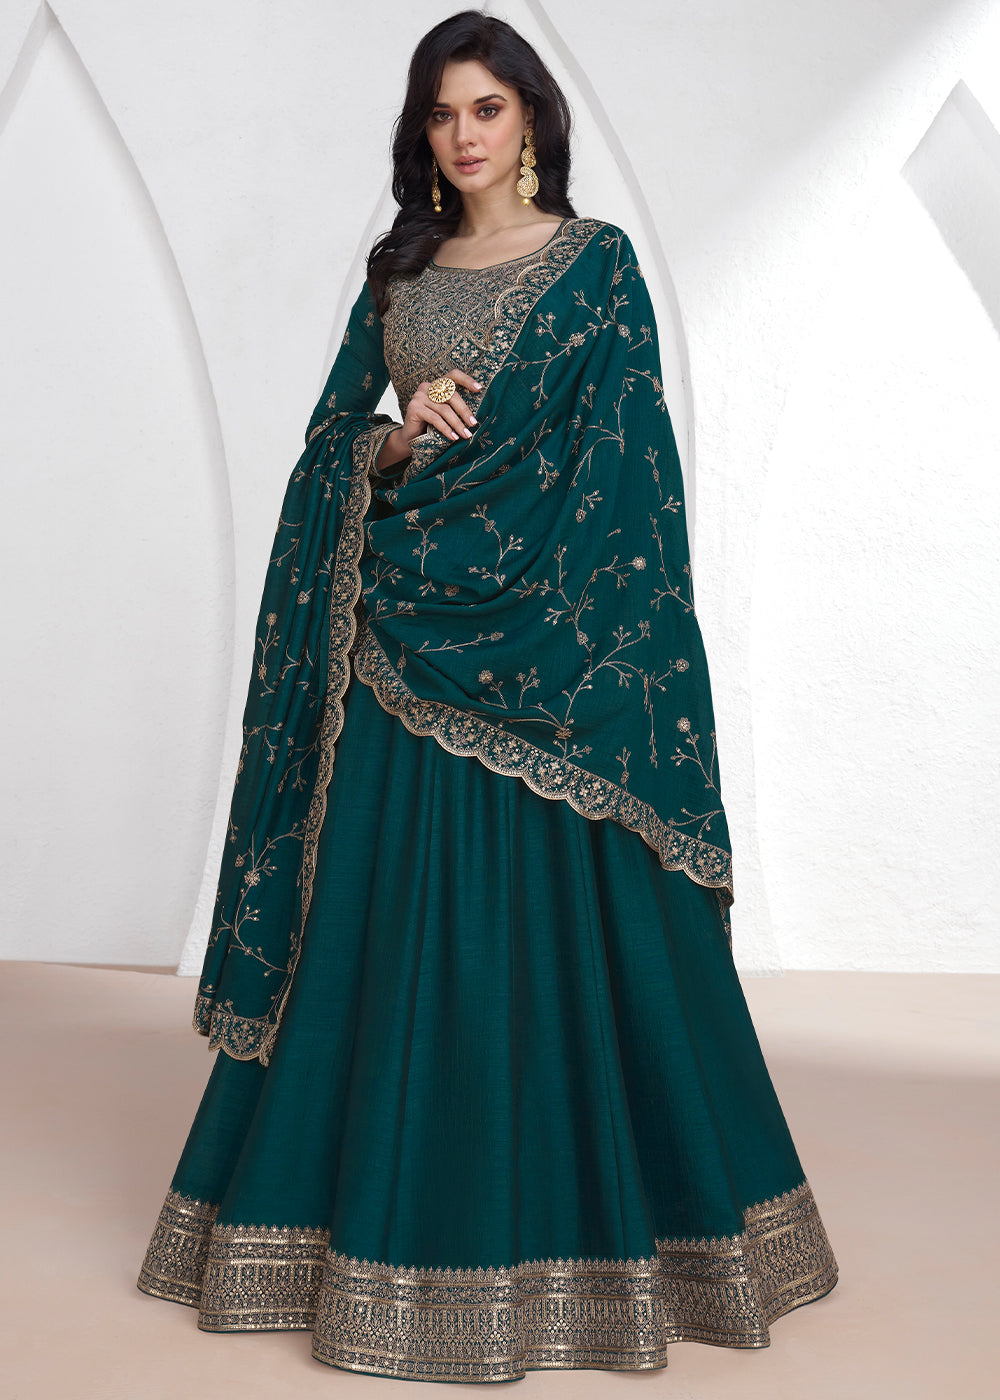 Prussian Blue Silk Anarkali Suit with Embroidery work